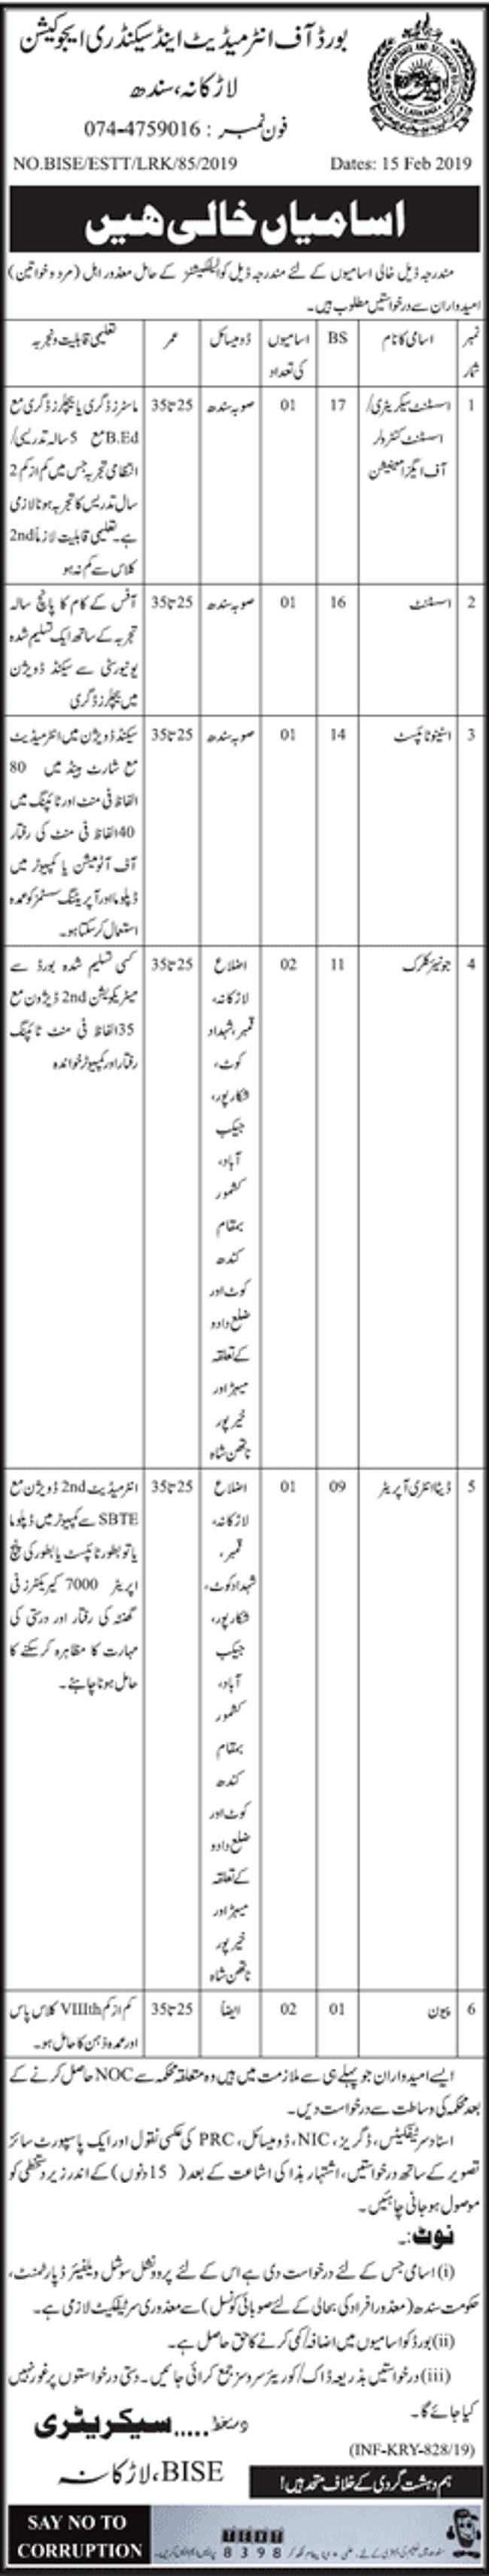 BISE Larkana Jobs 2019 for 8+ Jr Clerks, Stenotypists, Assistant, DEO & Other Posts (Disable Quota)